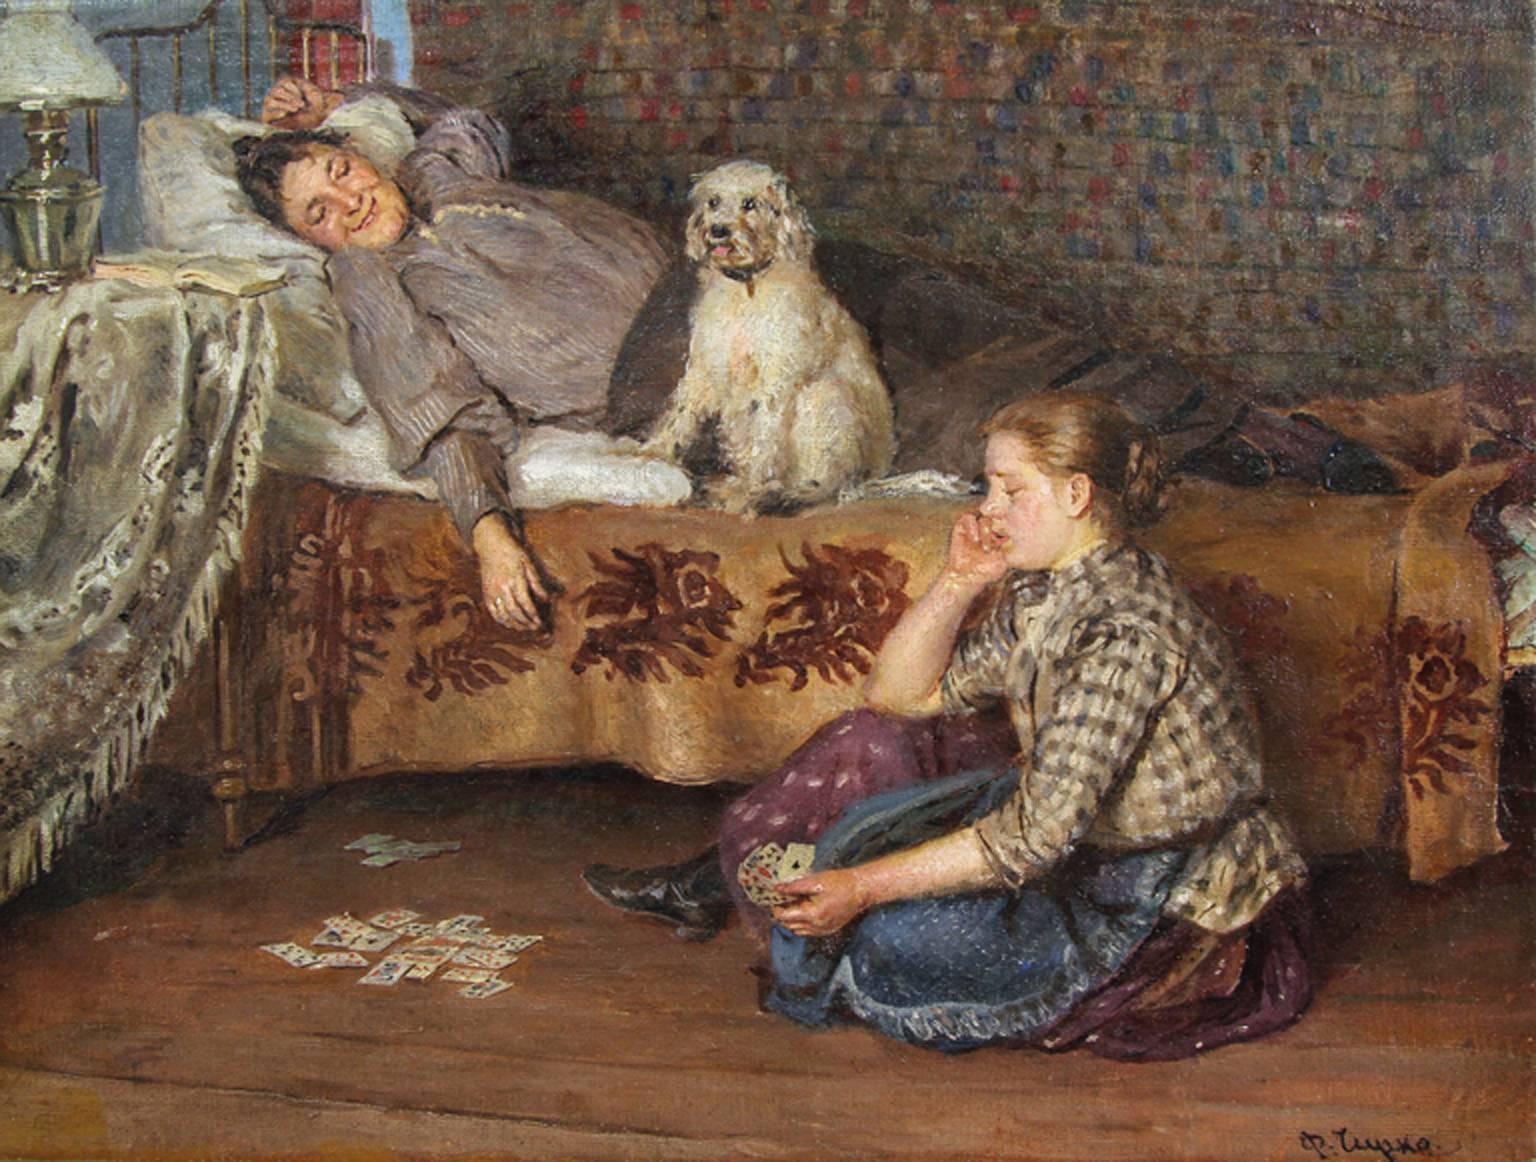 A rare antique painting by a master Russian artist in the early part of the 20th century depicting a beautiful young girl playing cards while her mother and puppy observe. A really superb and life like image of a sweet family moment with an infusion